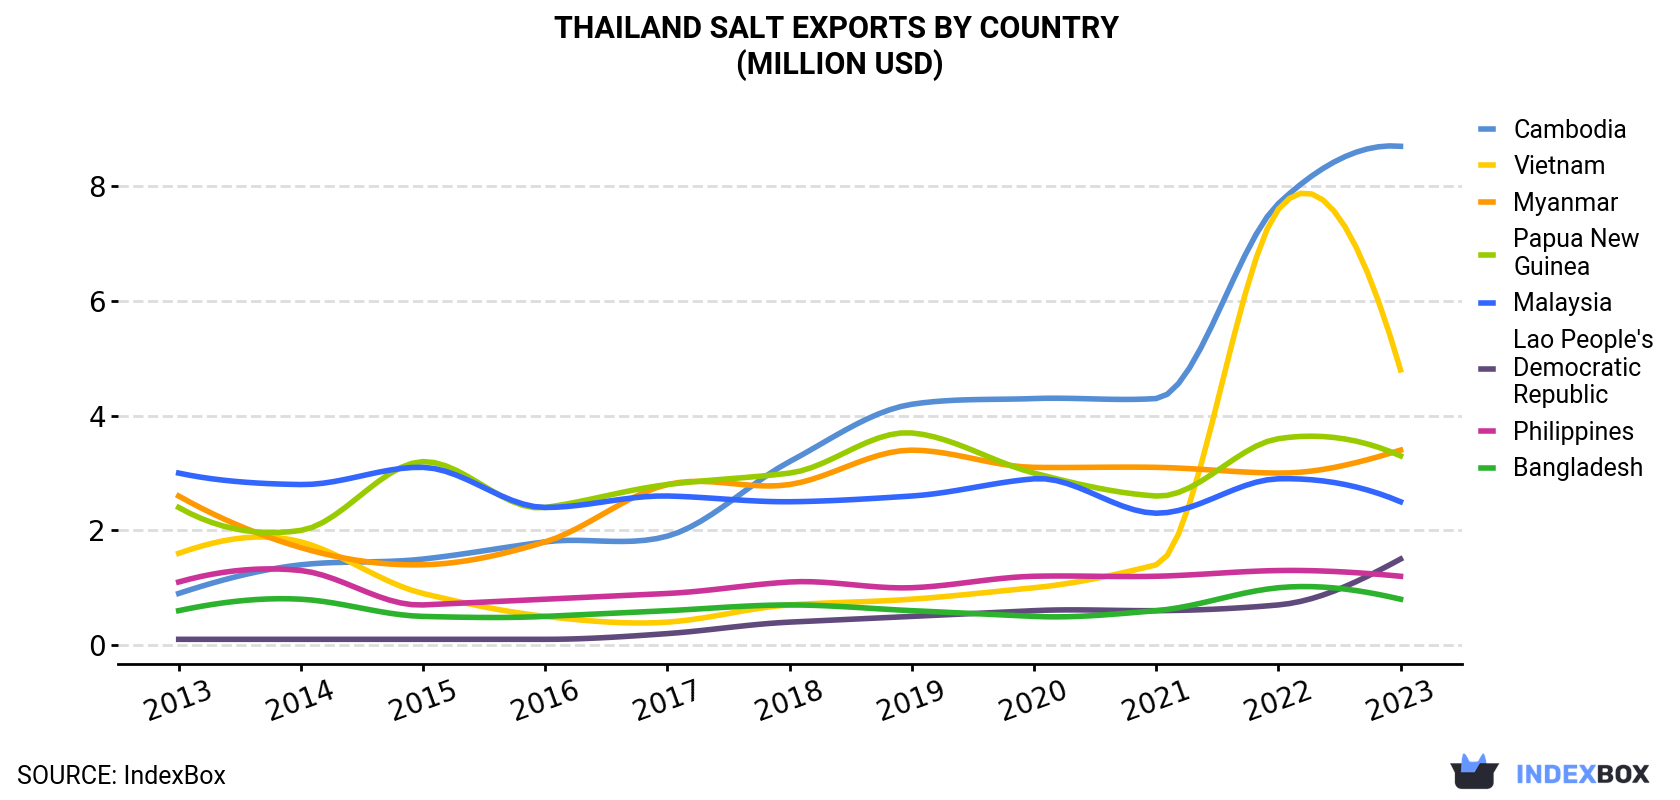 Thailand Salt Exports By Country (Million USD)